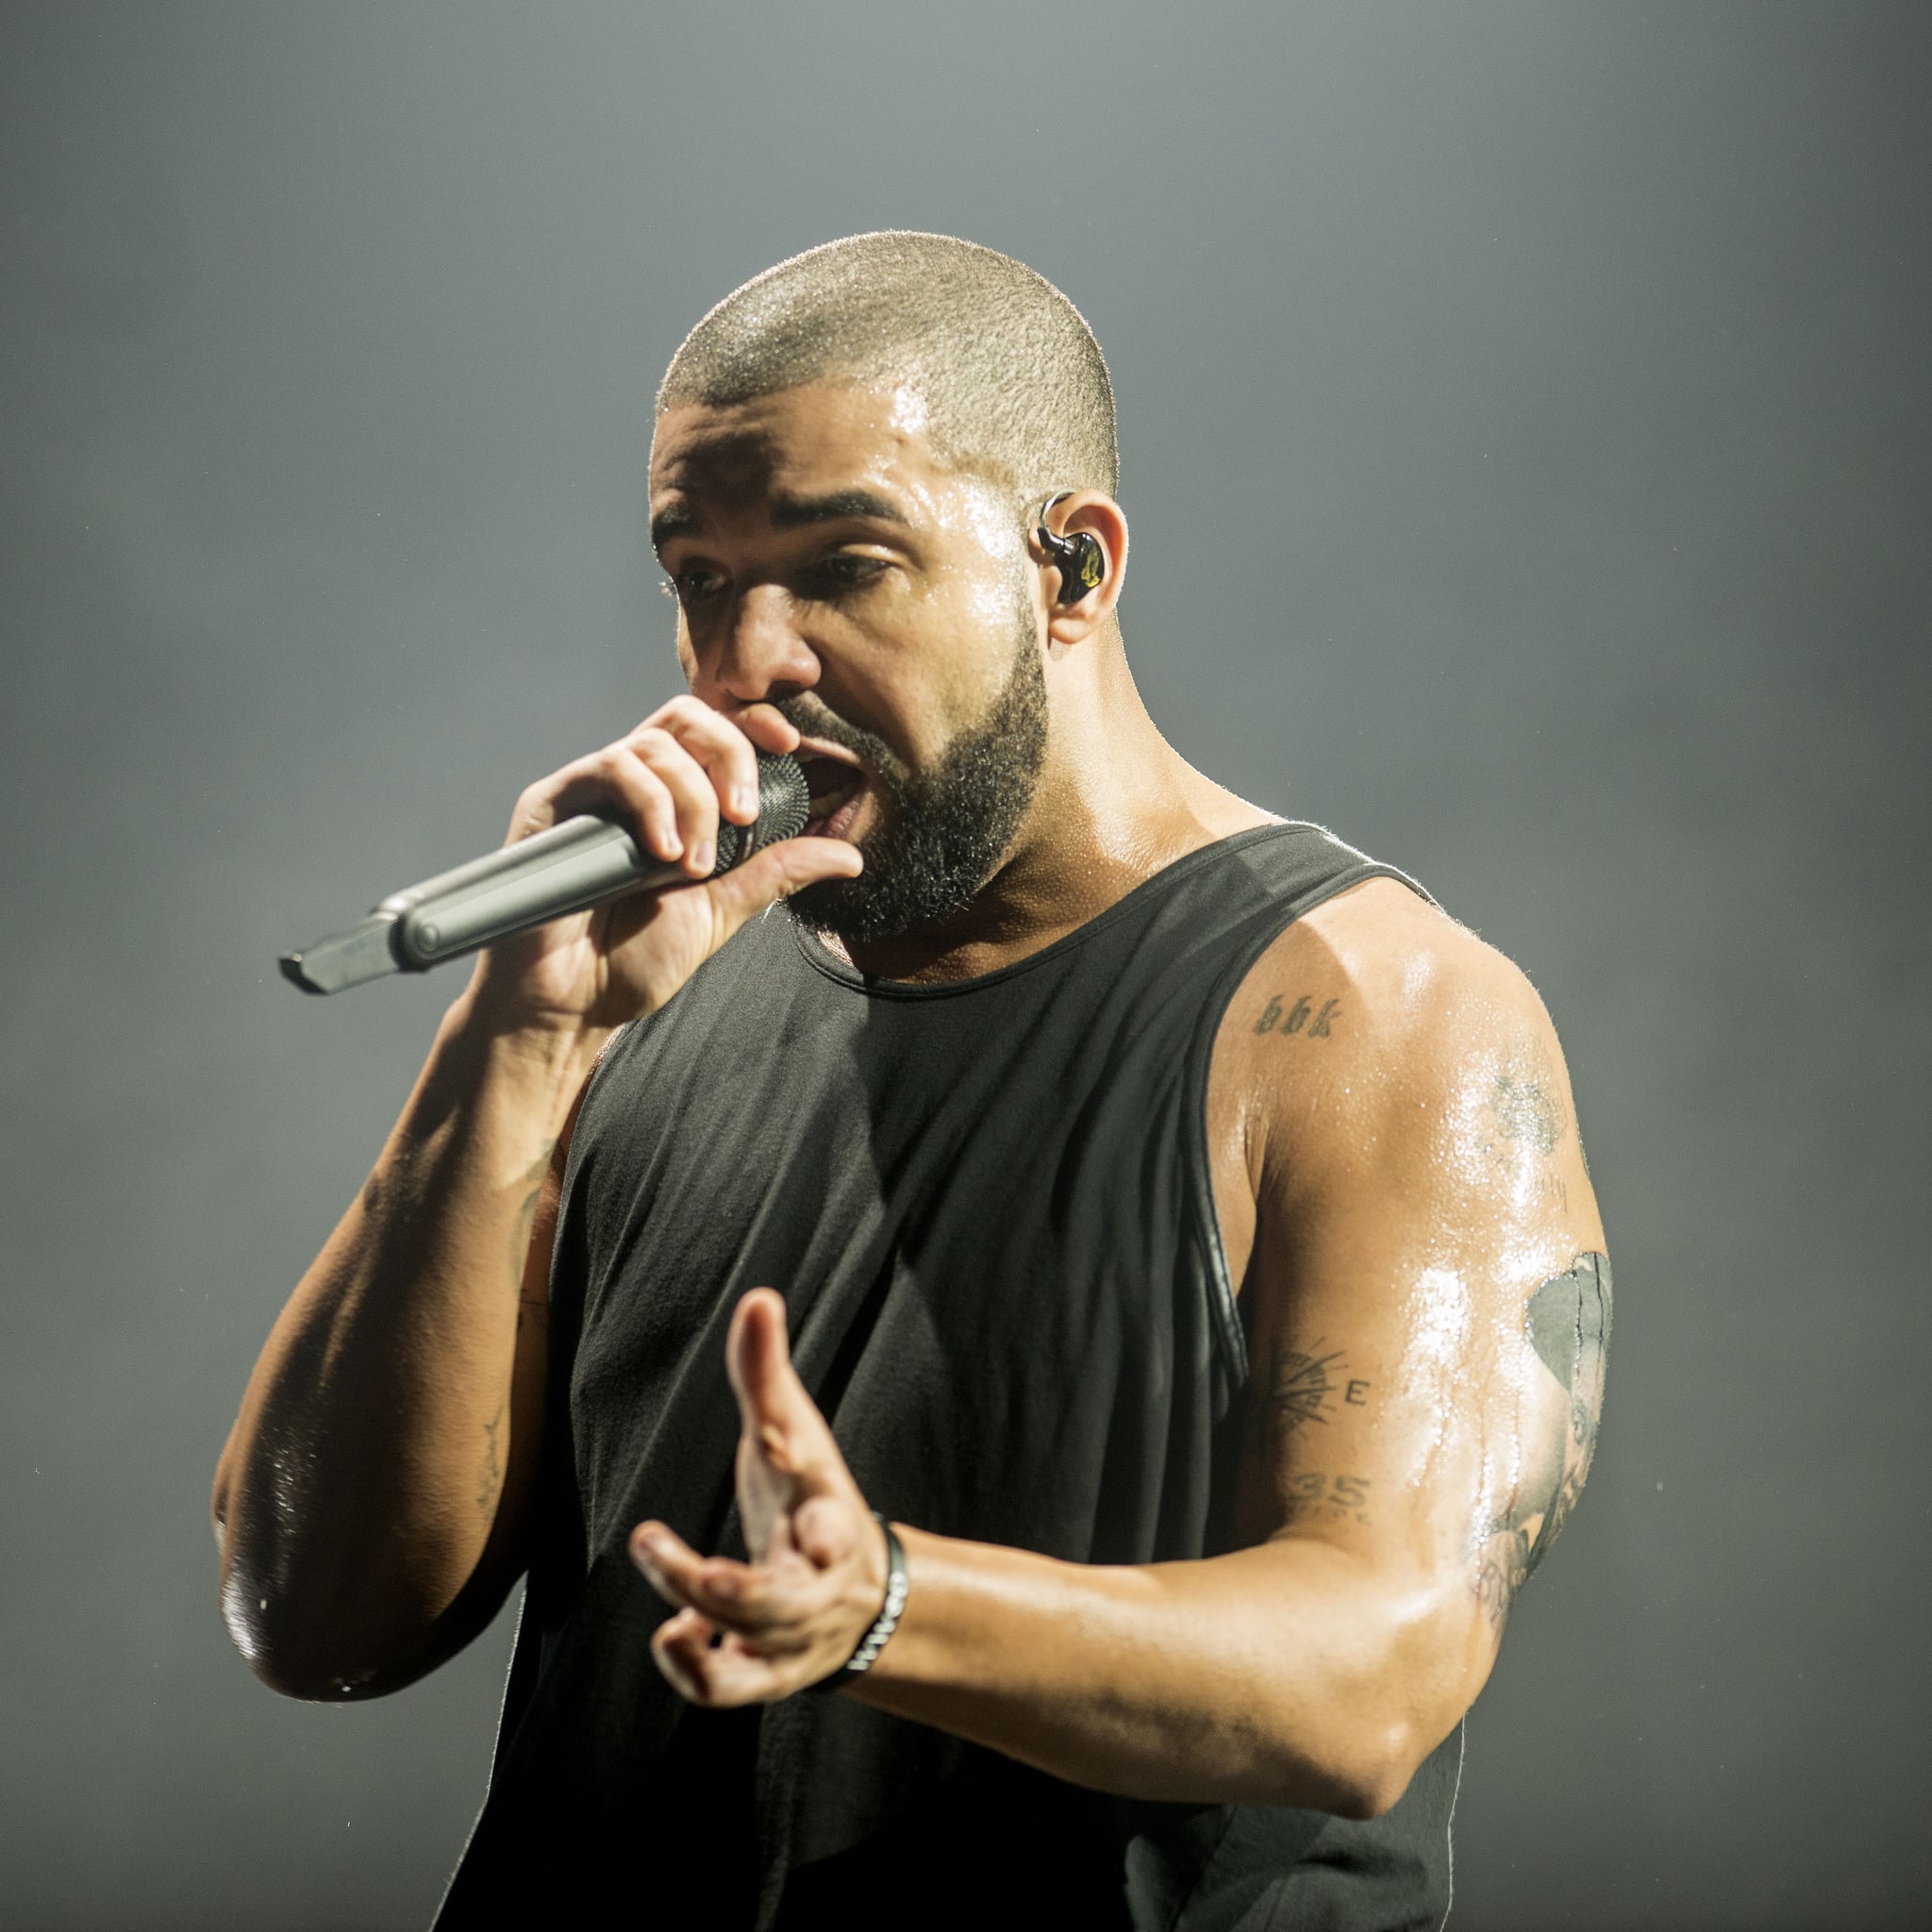 Drake's Tattoos and Their Meanings